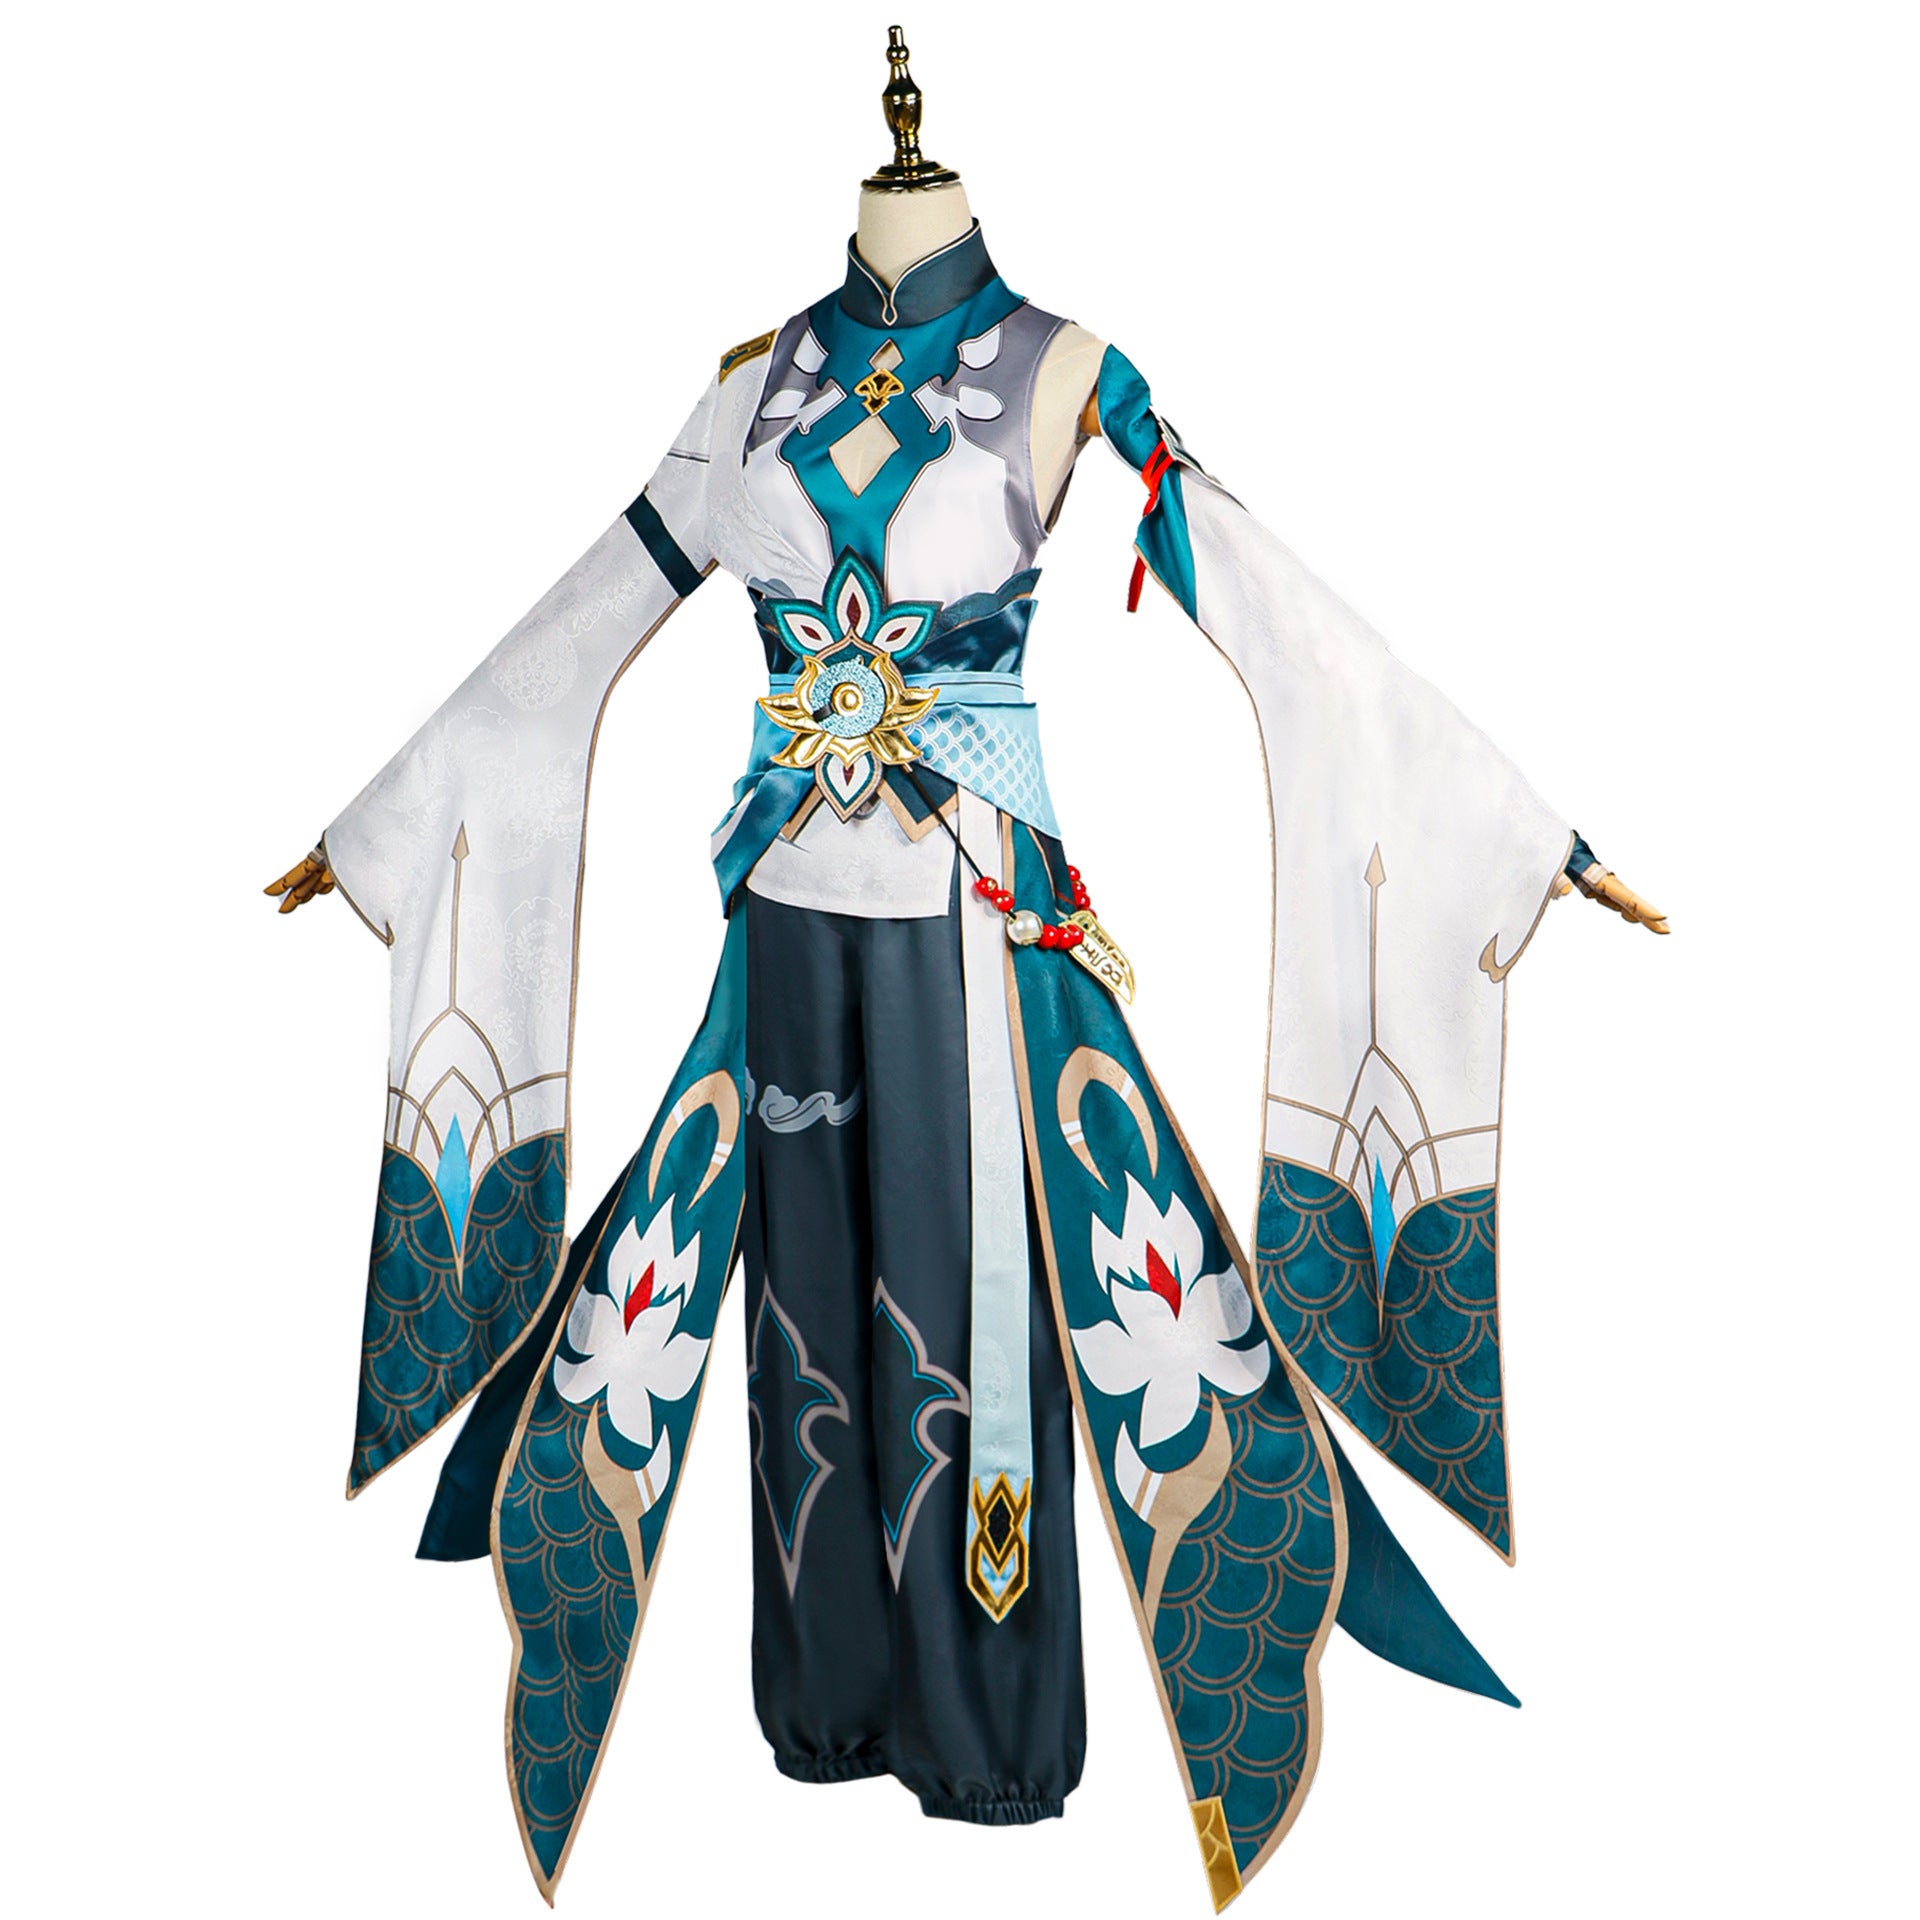 Rulercosplay Honkai Star Rail Imbibitor Lunae Uniform Suit Cosplay Costume With Accessories For Halloween Party